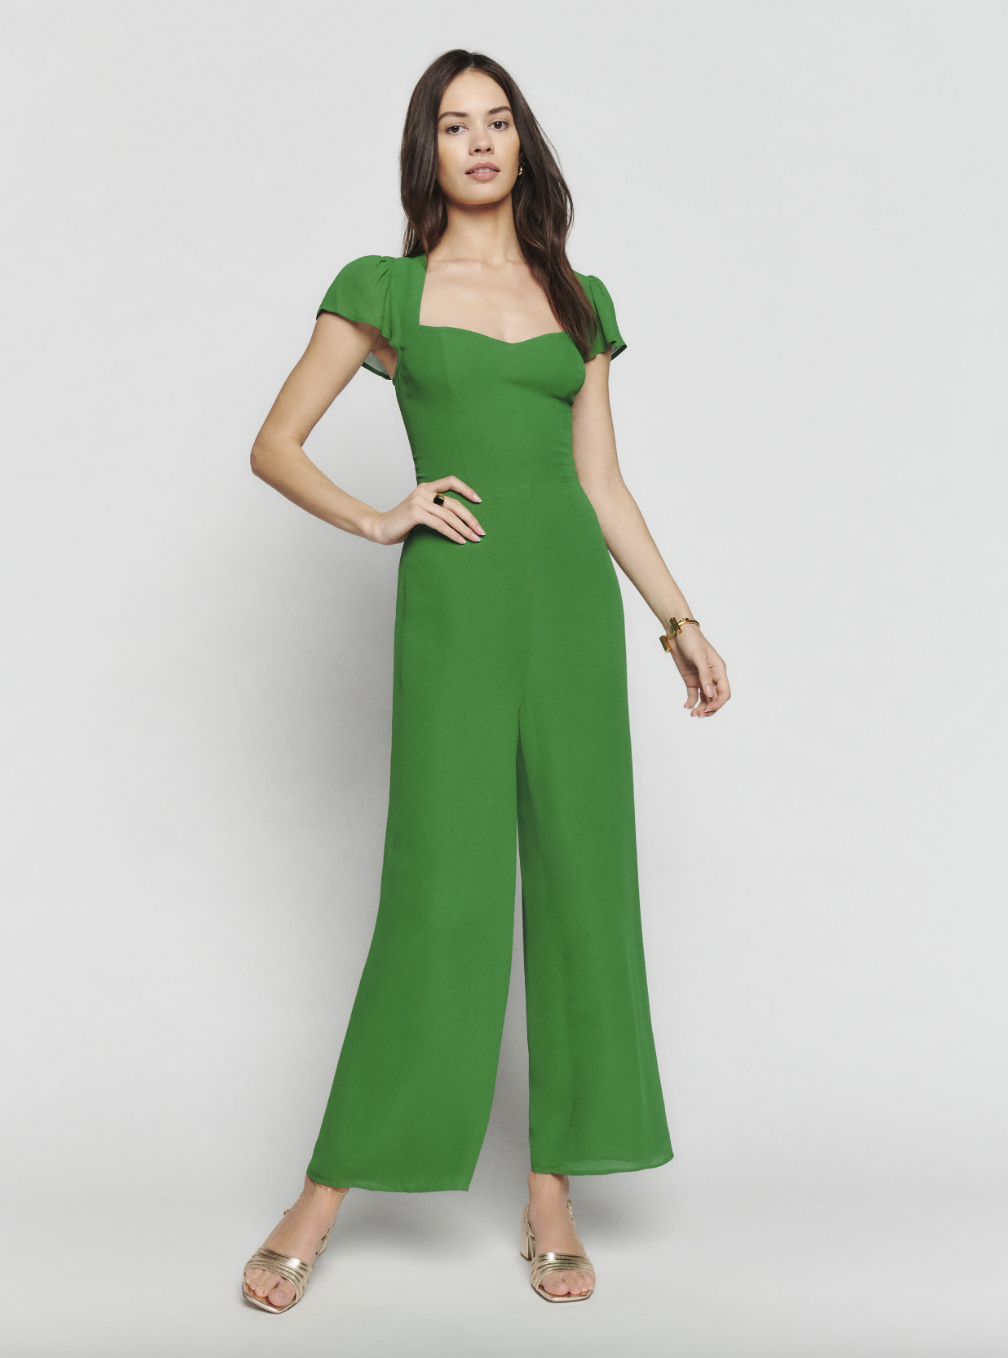 Discover more than 68 green jumpsuits for weddings latest - ceg.edu.vn